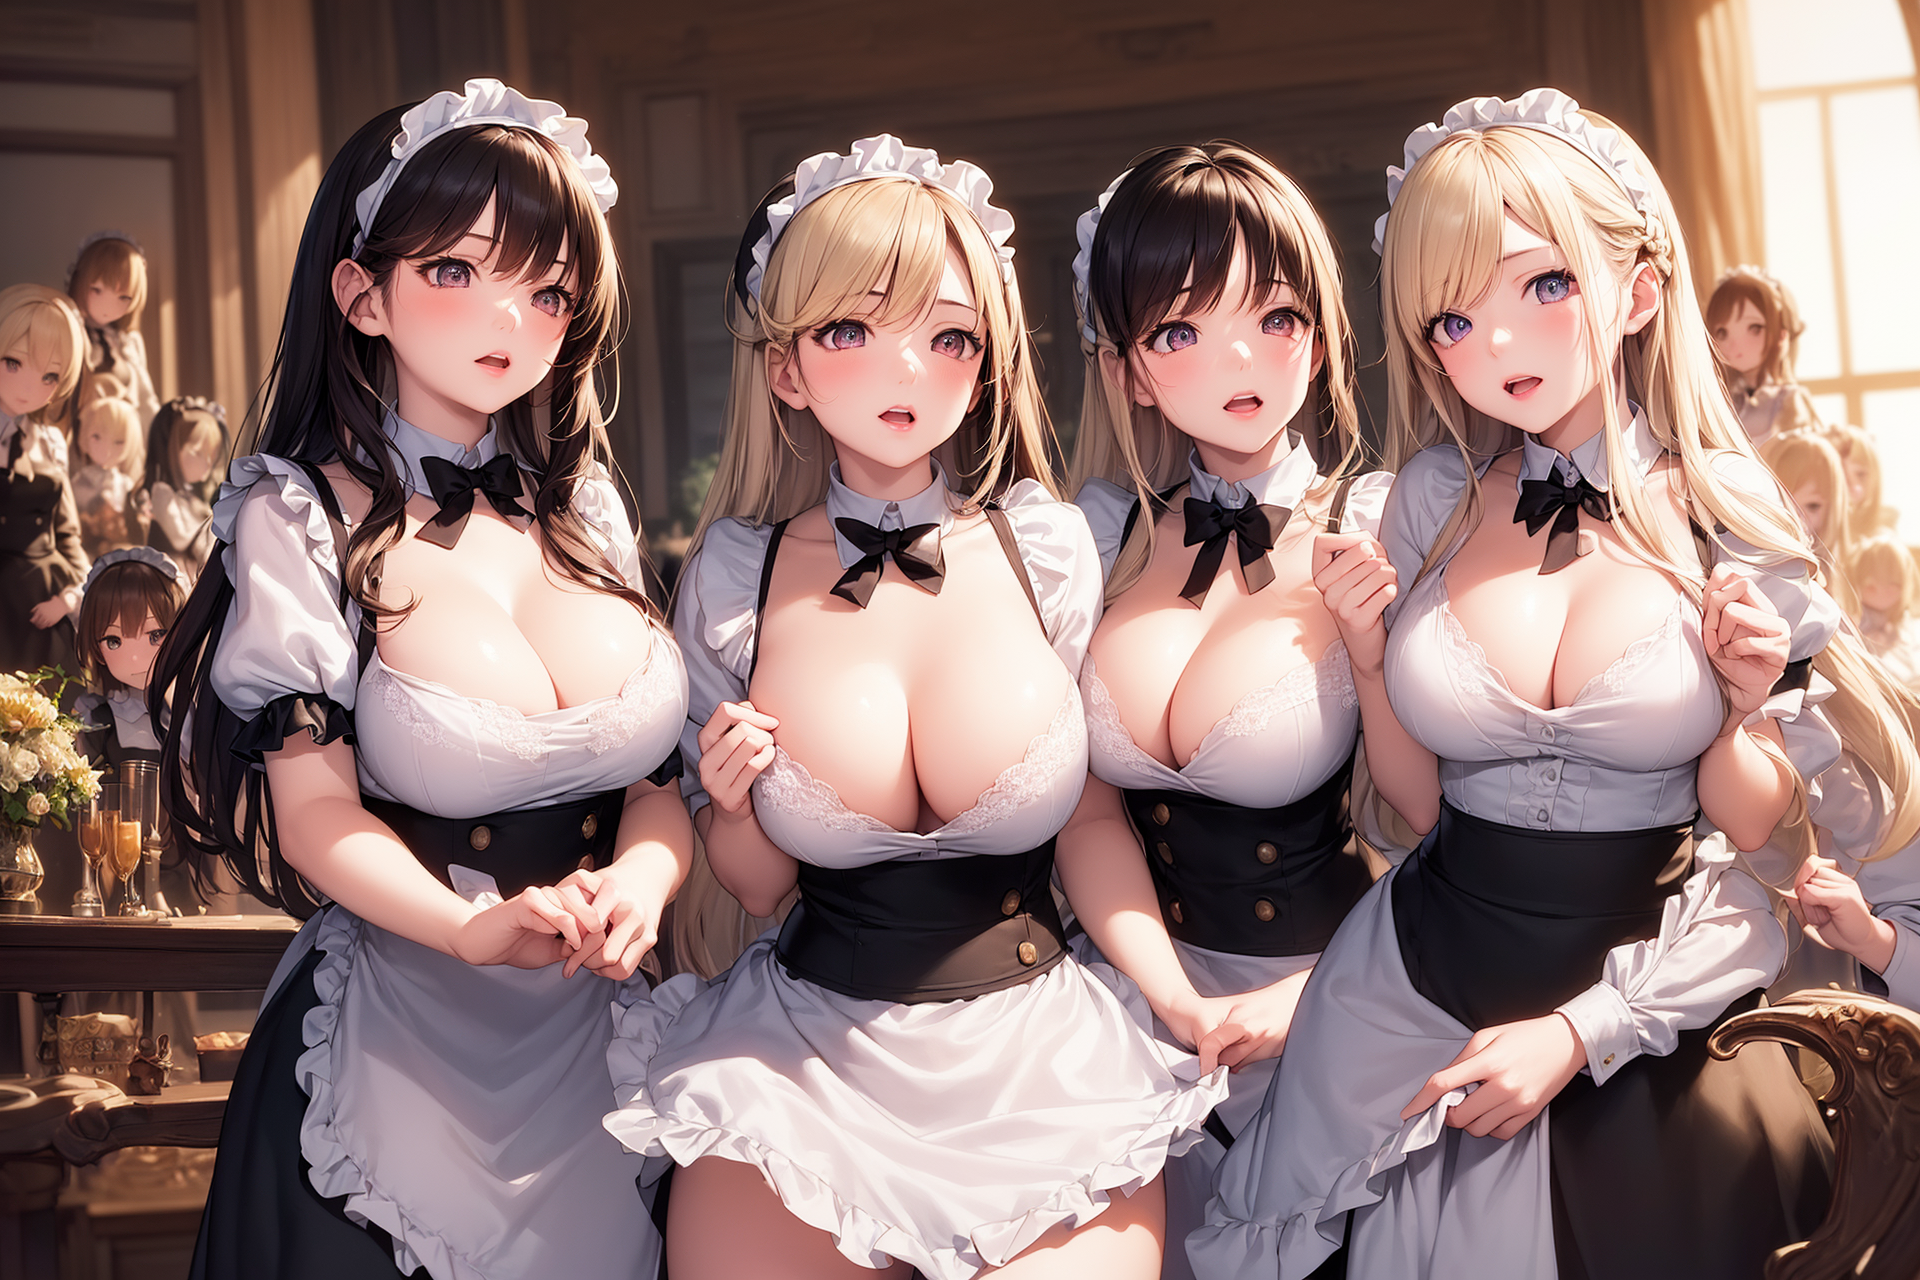 Anime 1920x1280 Pixiv AI art big boobs harem group of women line-up women quartet maid maid outfit long hair cleavage open mouth anime girls bow tie